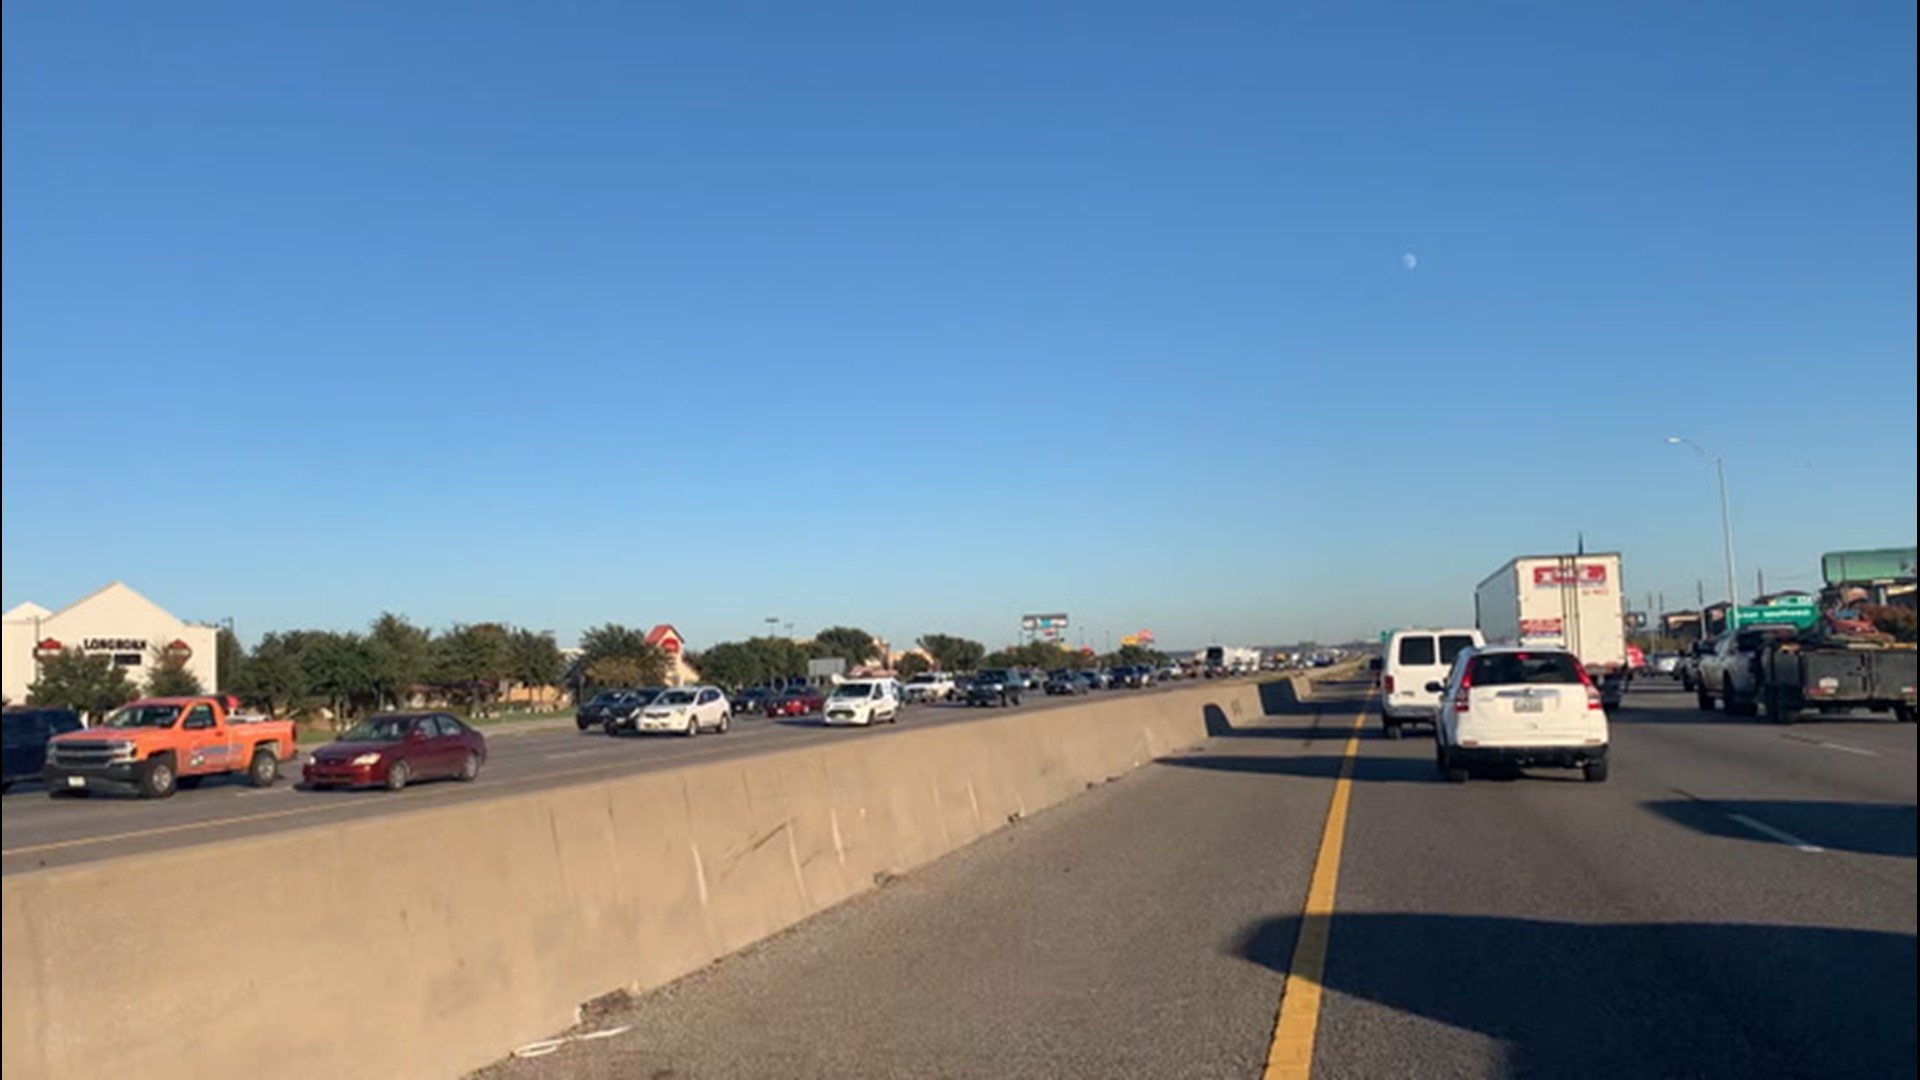 Bill Wadell experienced bright blue skies and lots of holiday traffic on I-20 in Grand Prairie, Texas, on the afternoon of Nov. 25, the day before Thanksgiving.